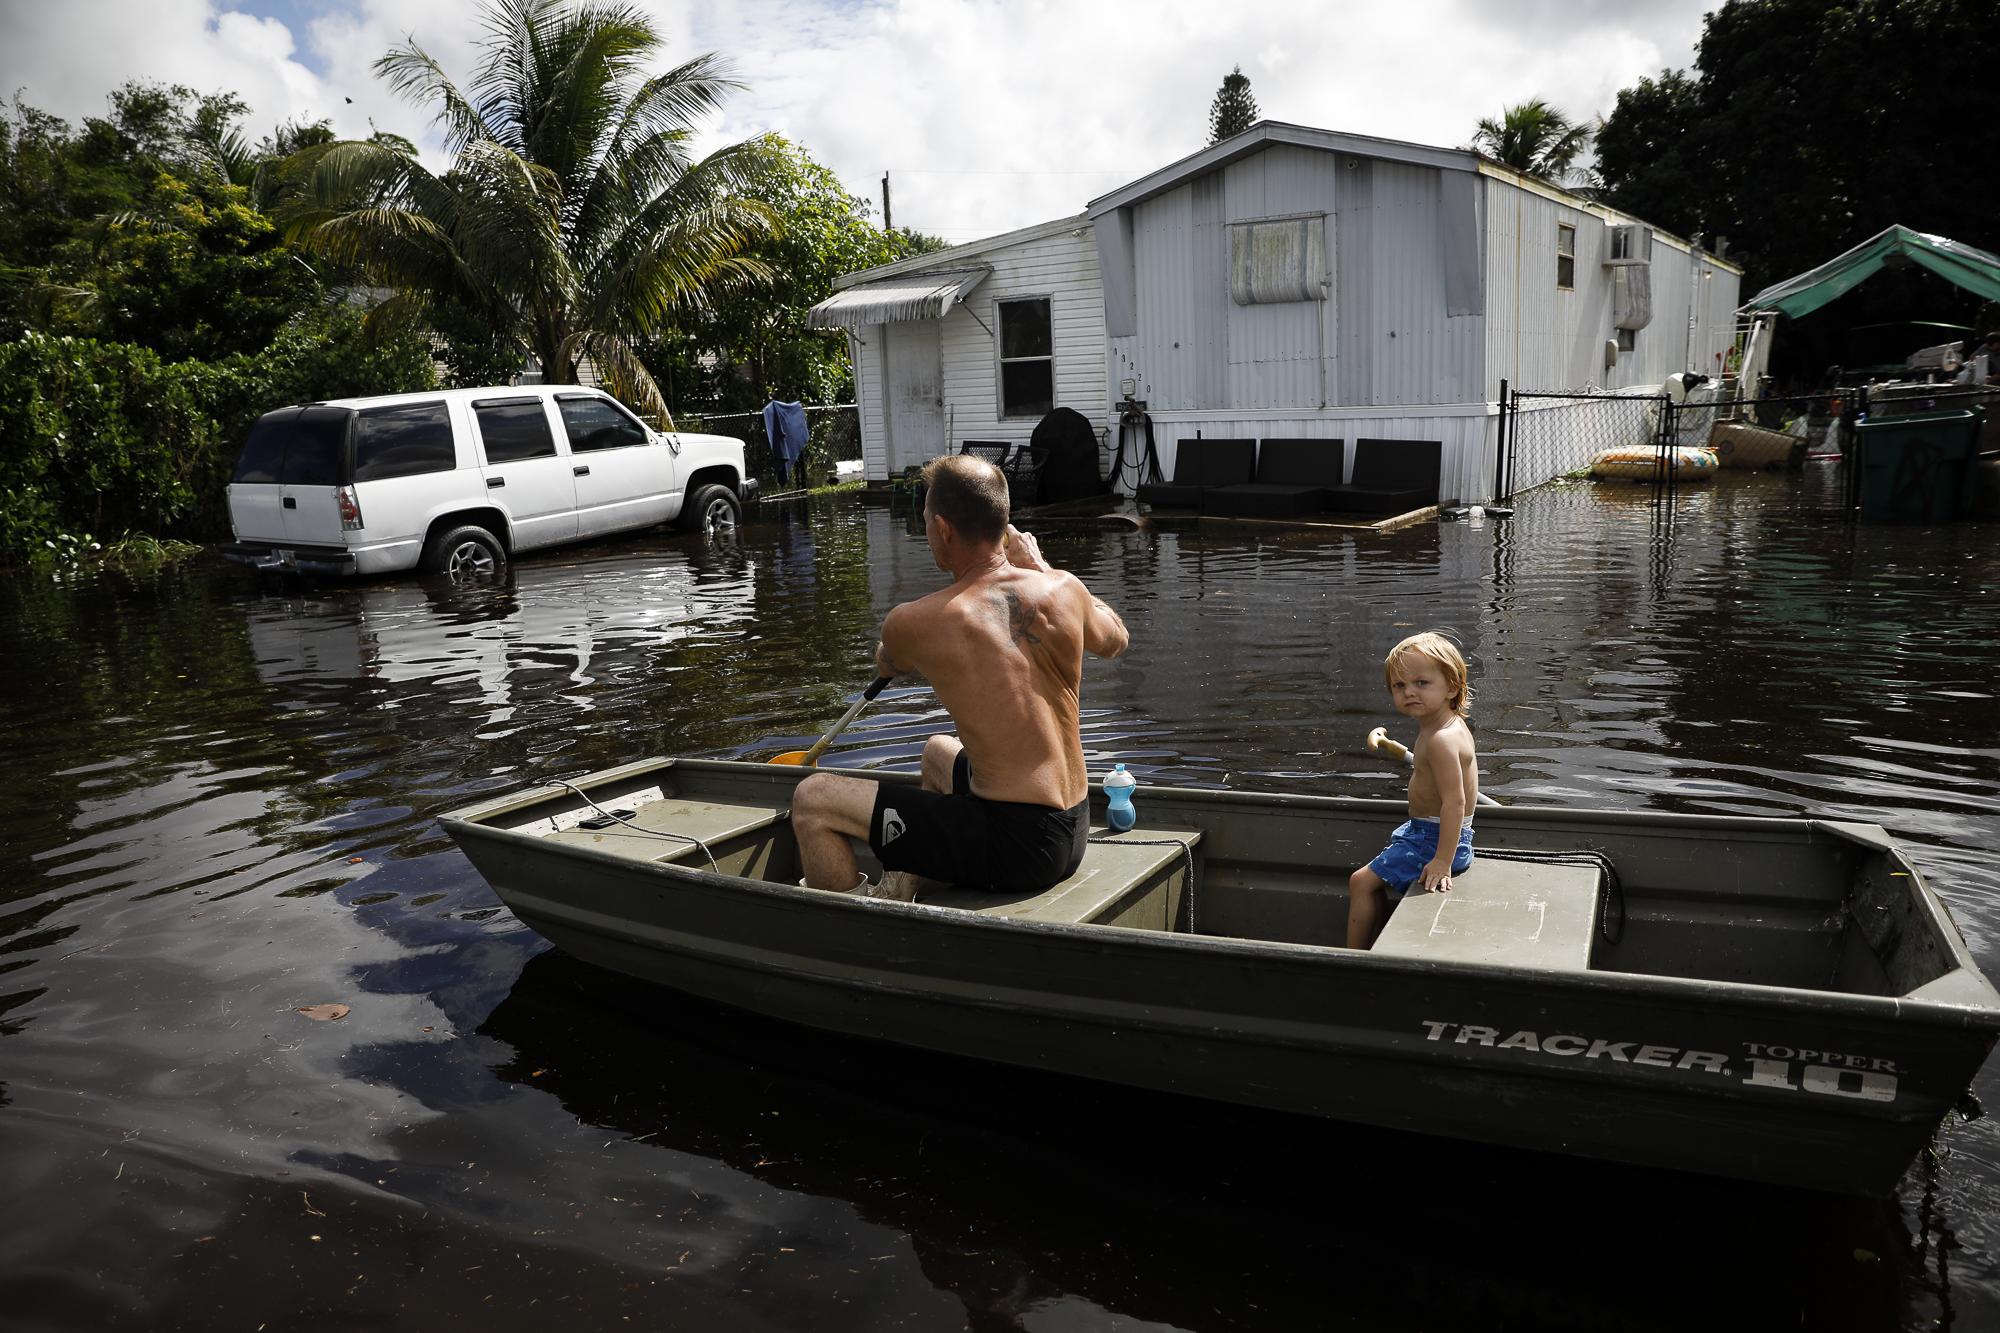 Tropical Storm Eta drenches South Florida - A man rows a boat in floodwaters caused by Storm Eta in...